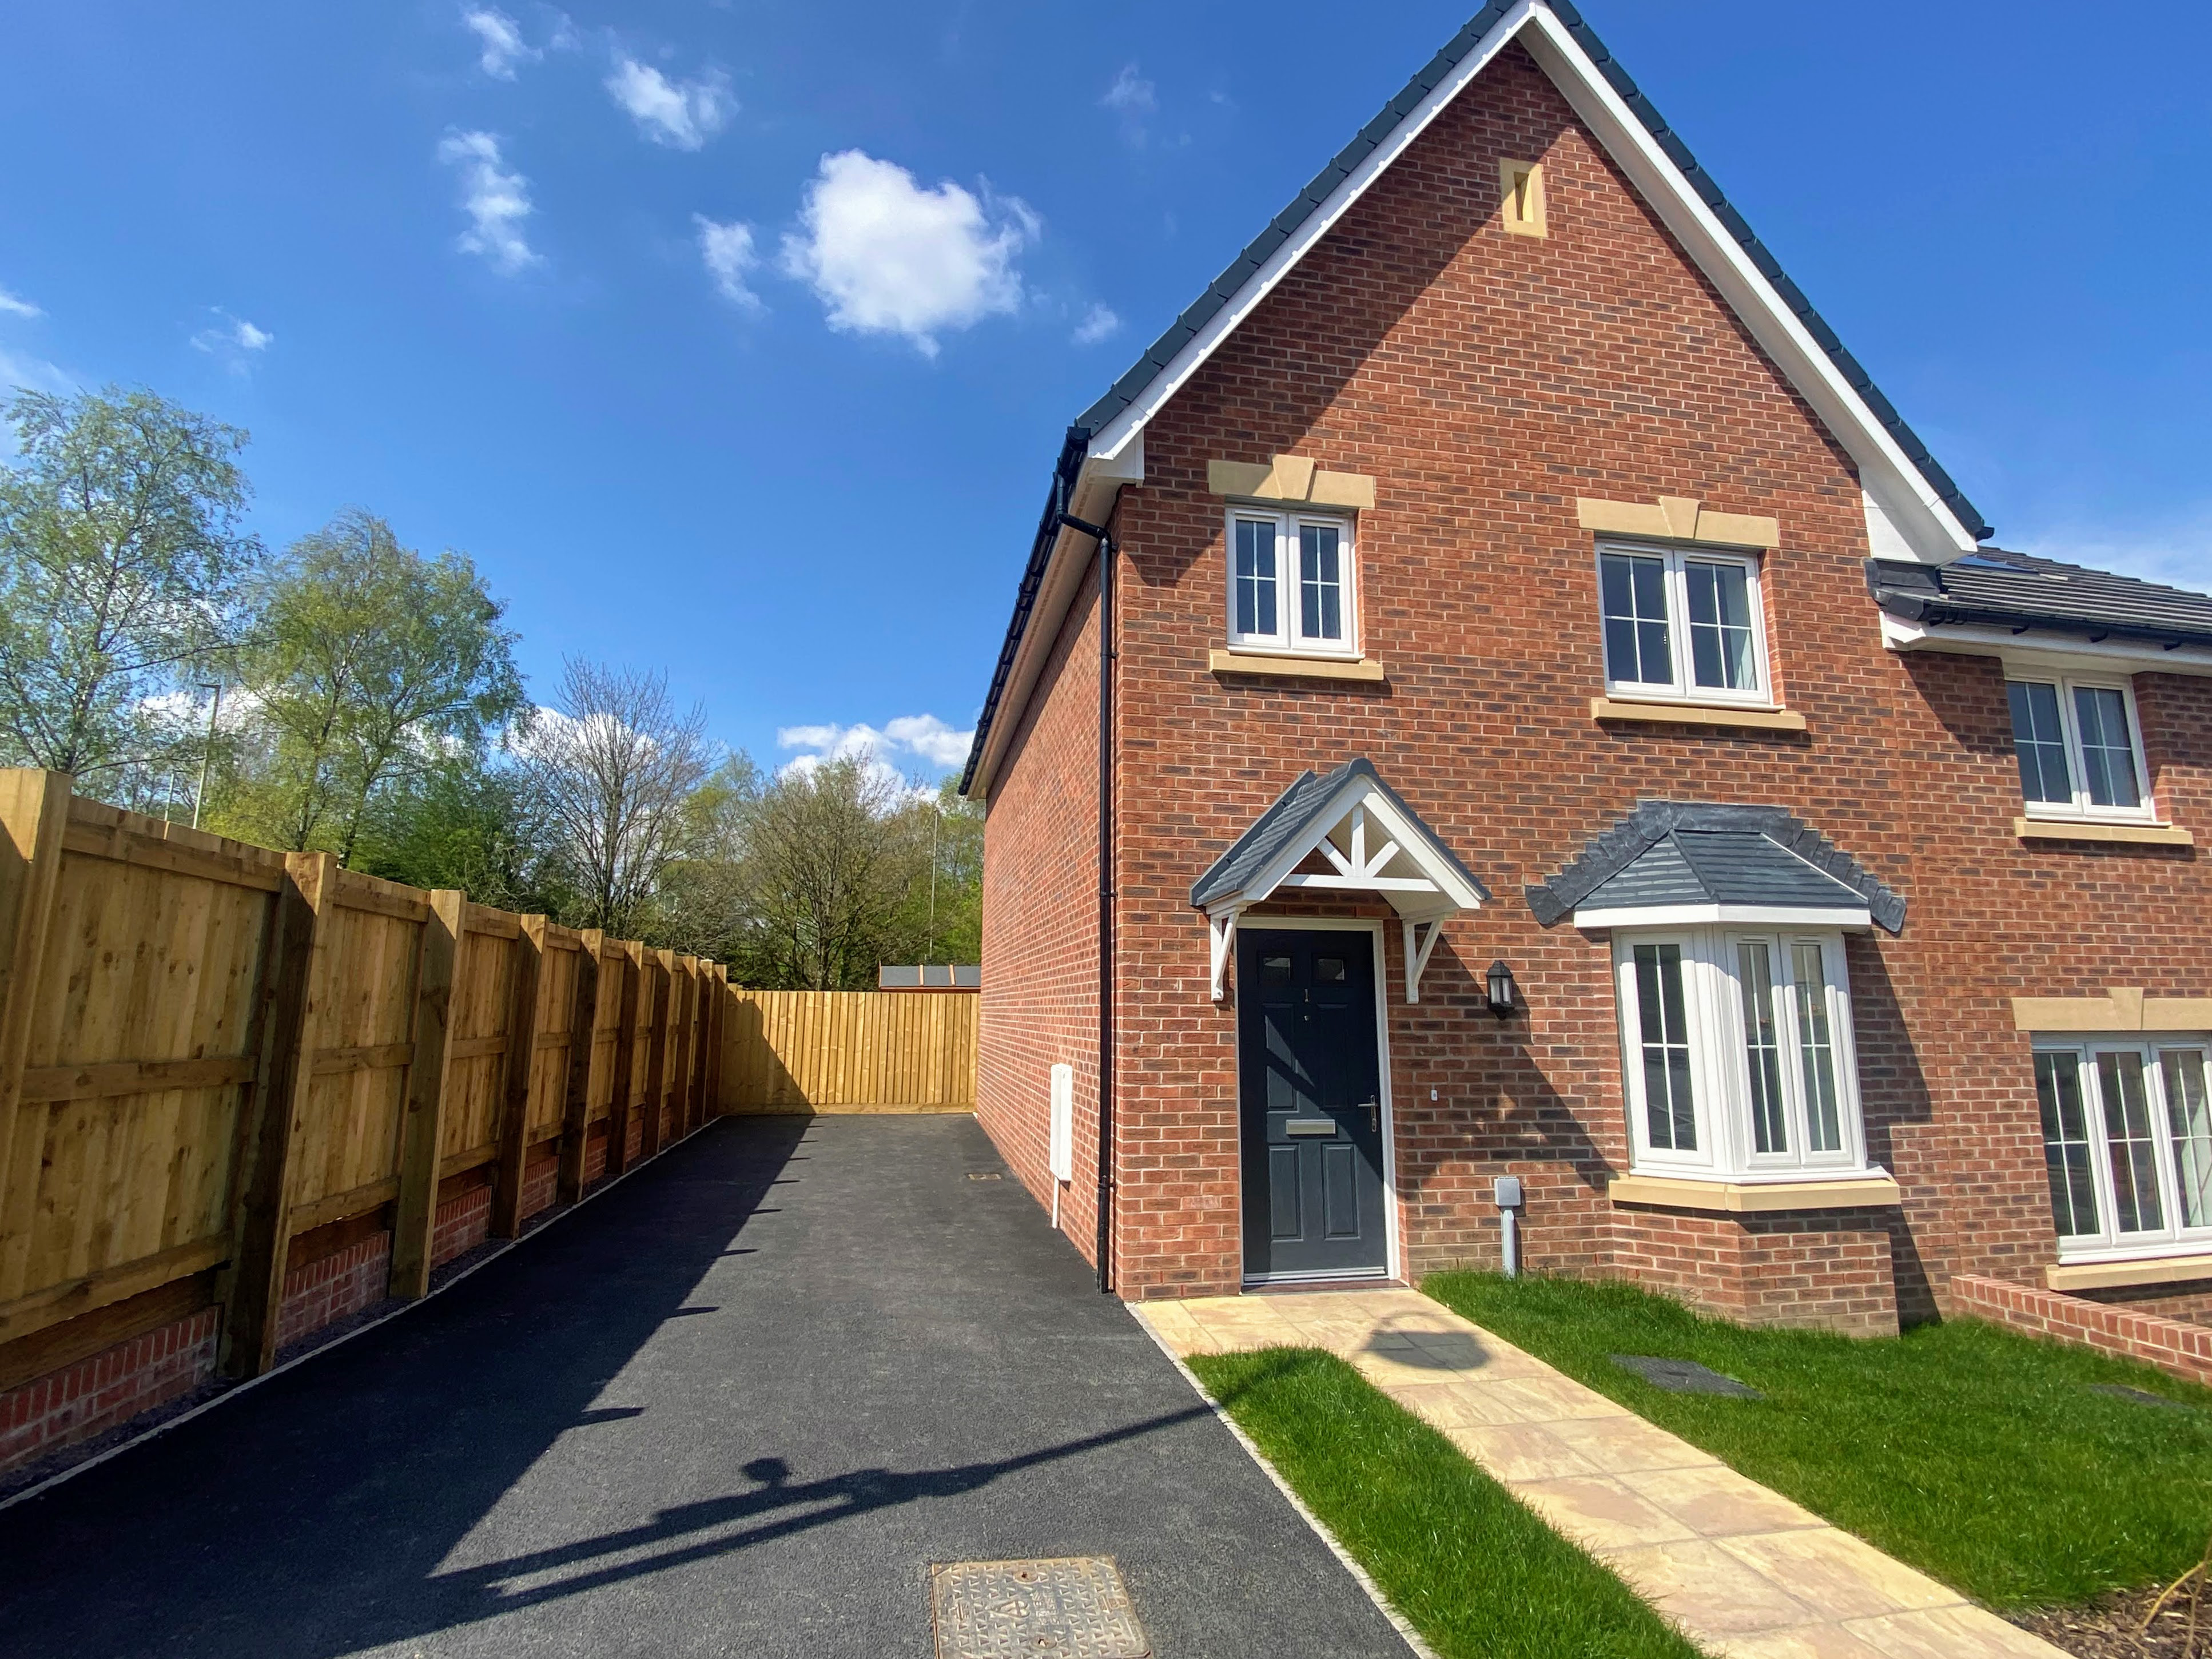 The exterior of one of our new homes in Hengoed, Caerphilly. The sky is blue, it has a large black tarmac driveway to the left. On the right is the house, with a black door and a bay window downstairs. There are two windows upstairs and a pointy roof. There is a cream patio out the front in a line from the door to the path, with grass in front of the window.